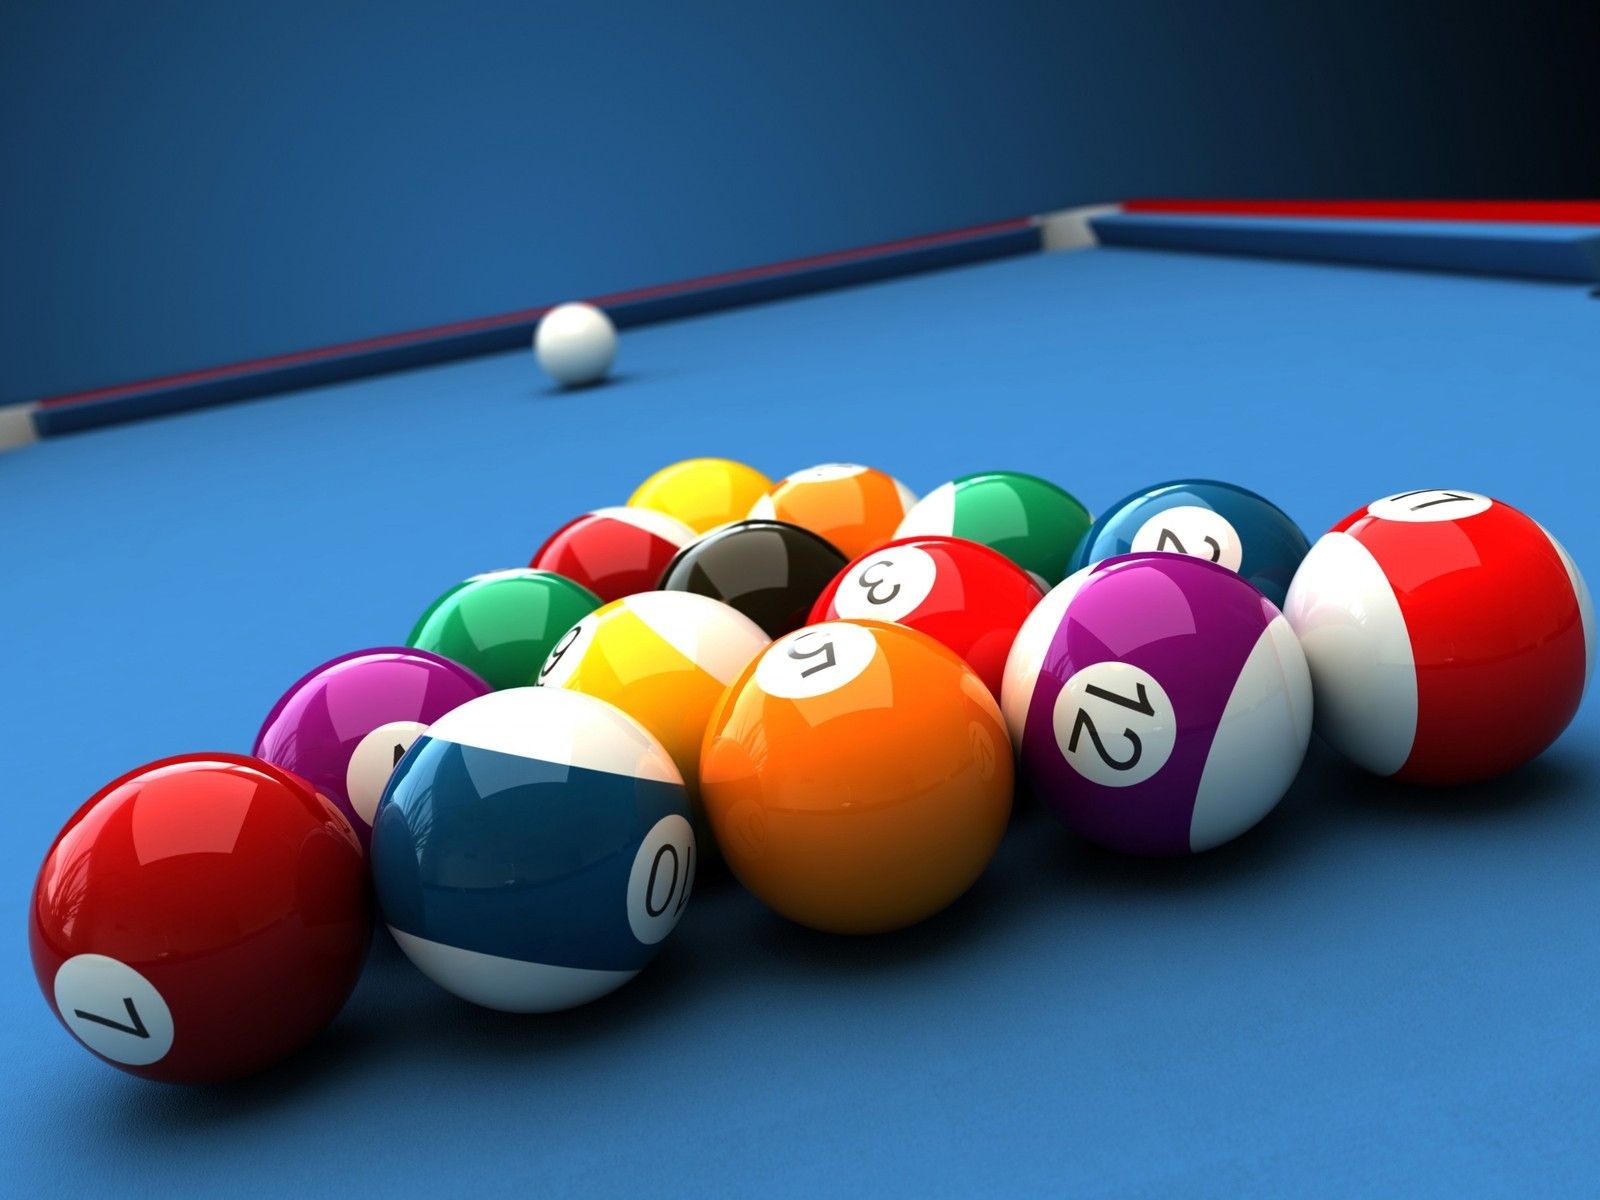 Billiards Table and Balls for 1600 x 1200 resolution